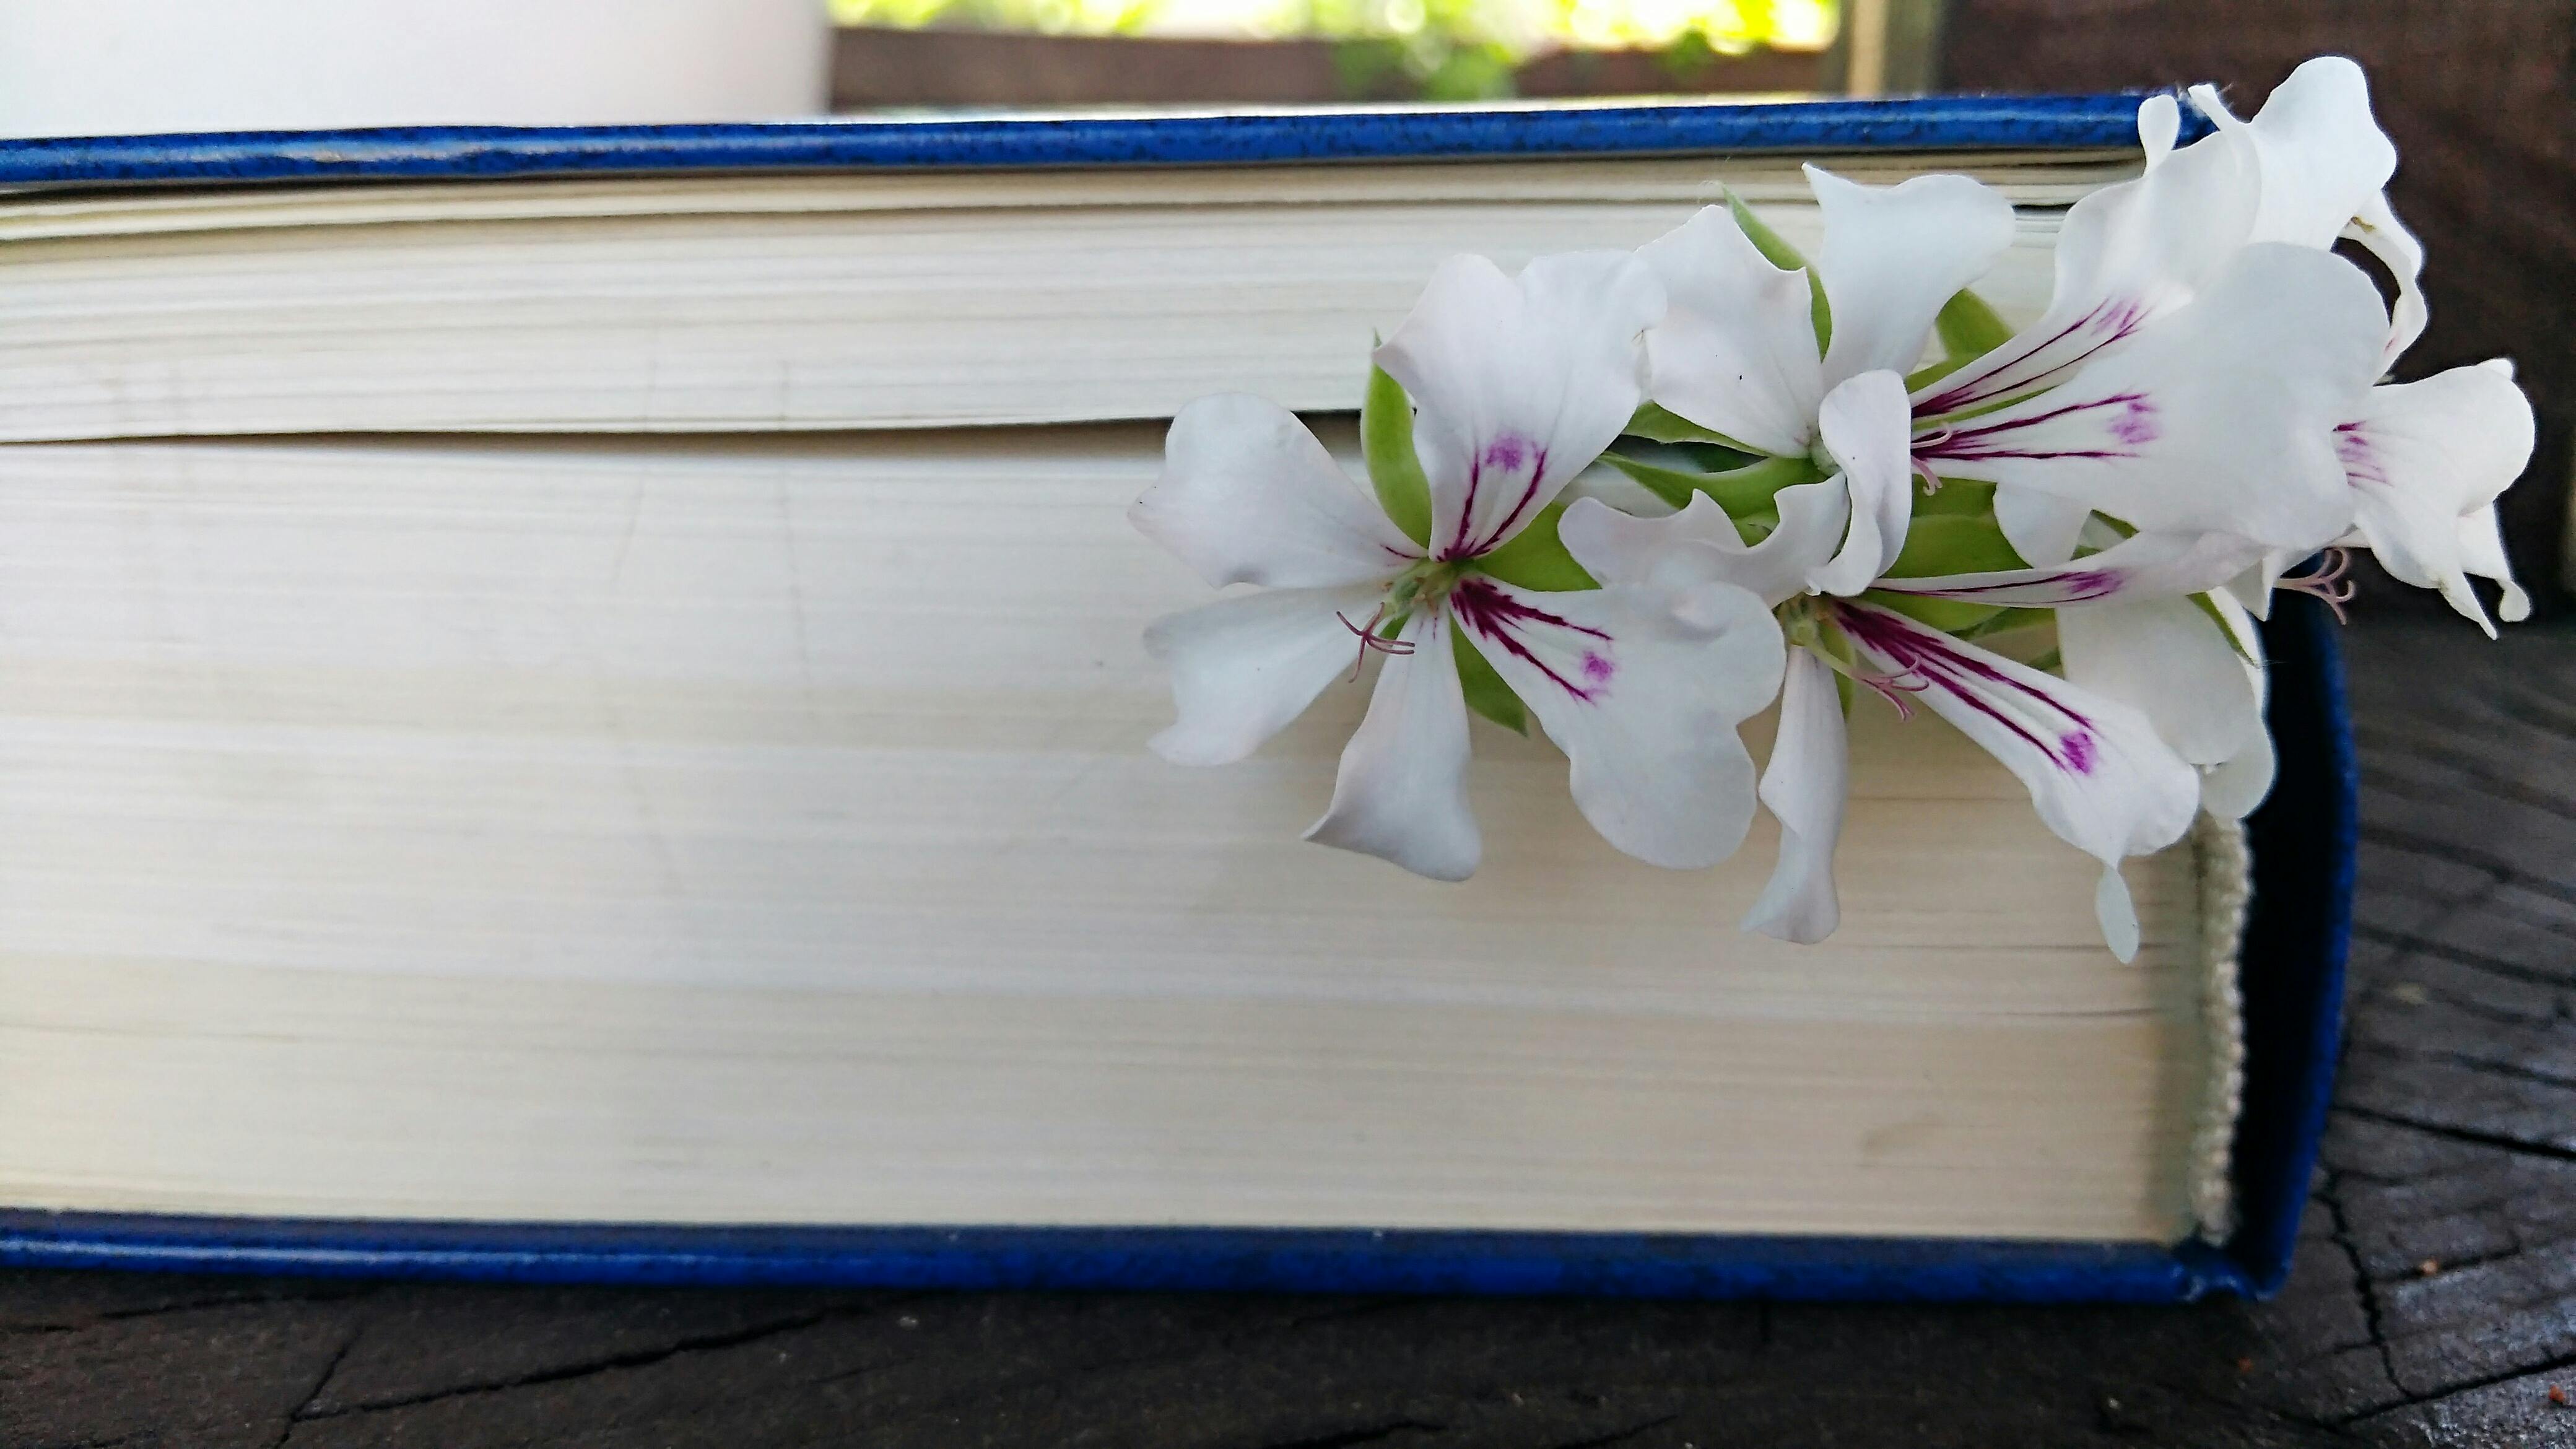 Free stock photo of book, flowers